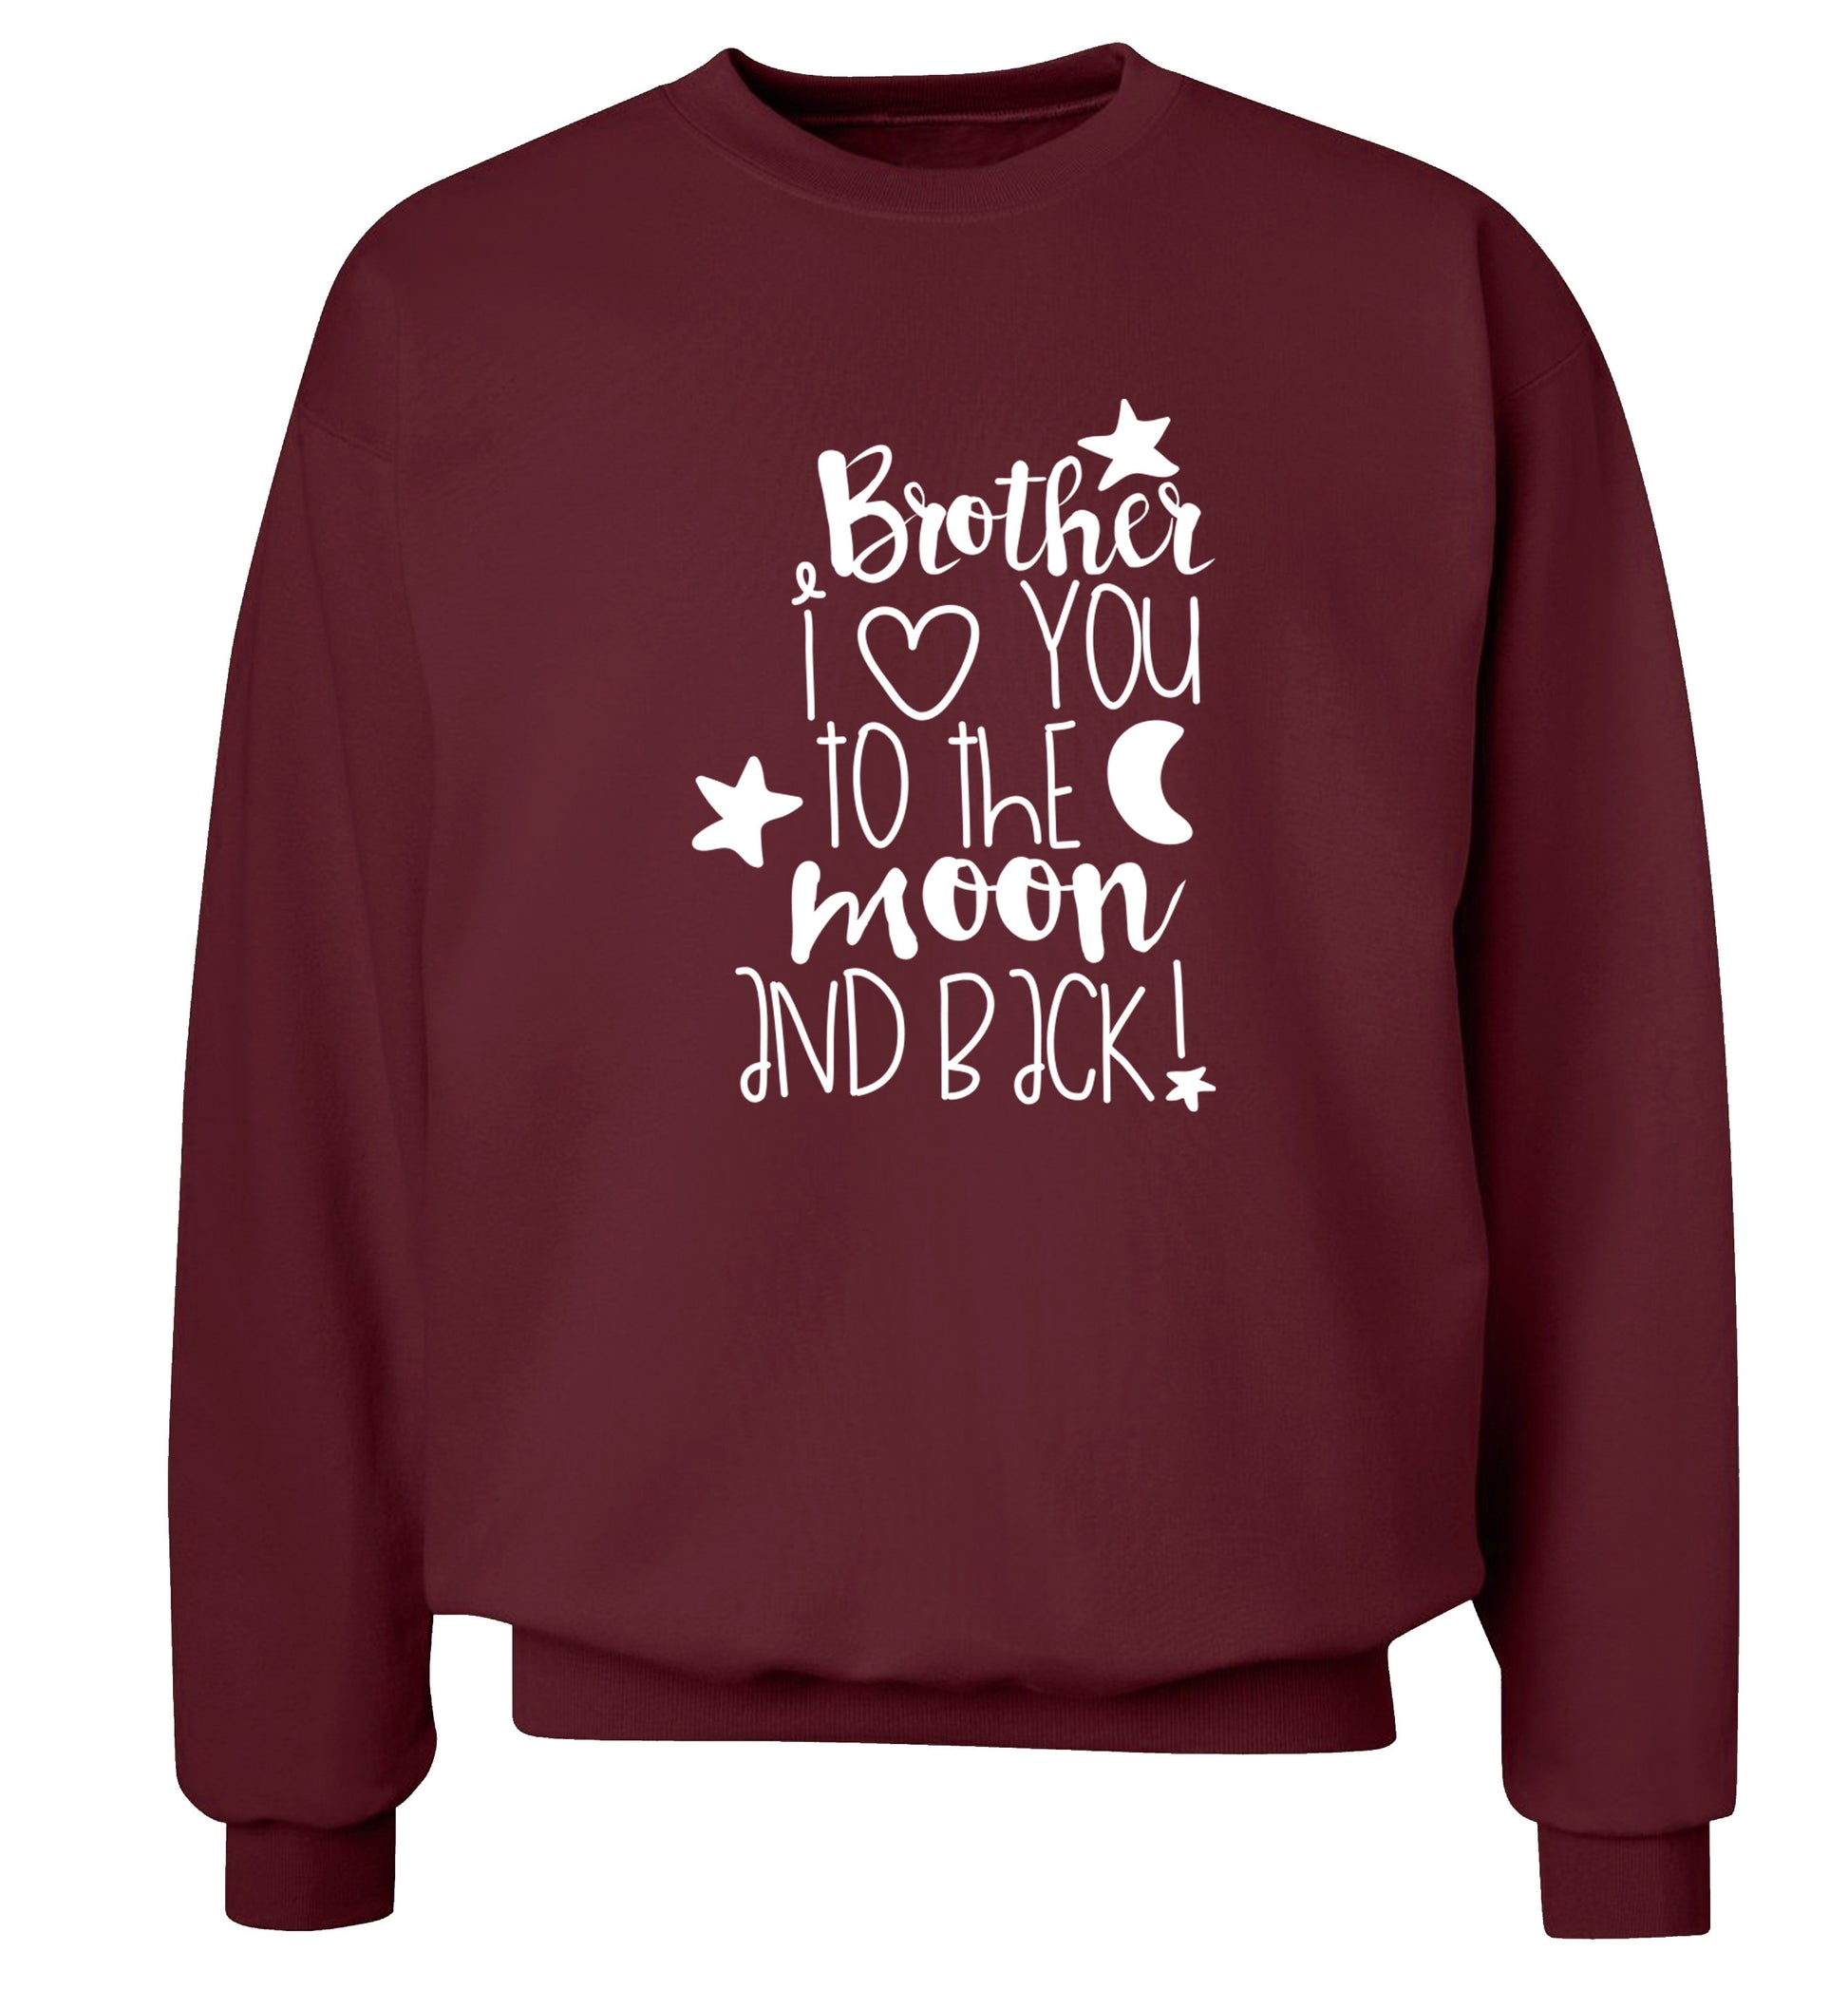 Brother I love you to the moon and back Adult's unisex maroon  sweater 2XL